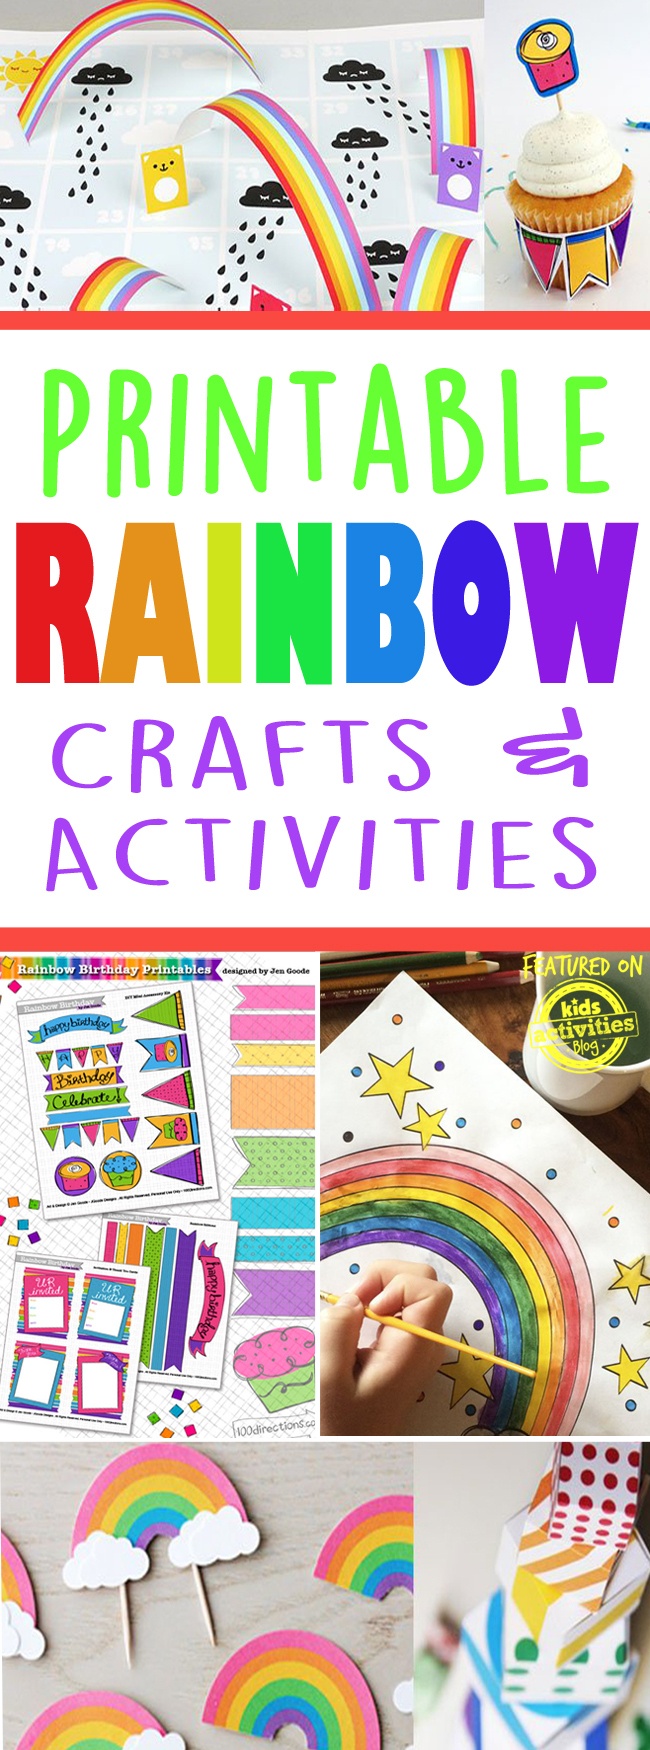 18 Printable Rainbow Crafts And Activities | Kids Activities Blog - Kidsactivitiesblog Com Free Printables